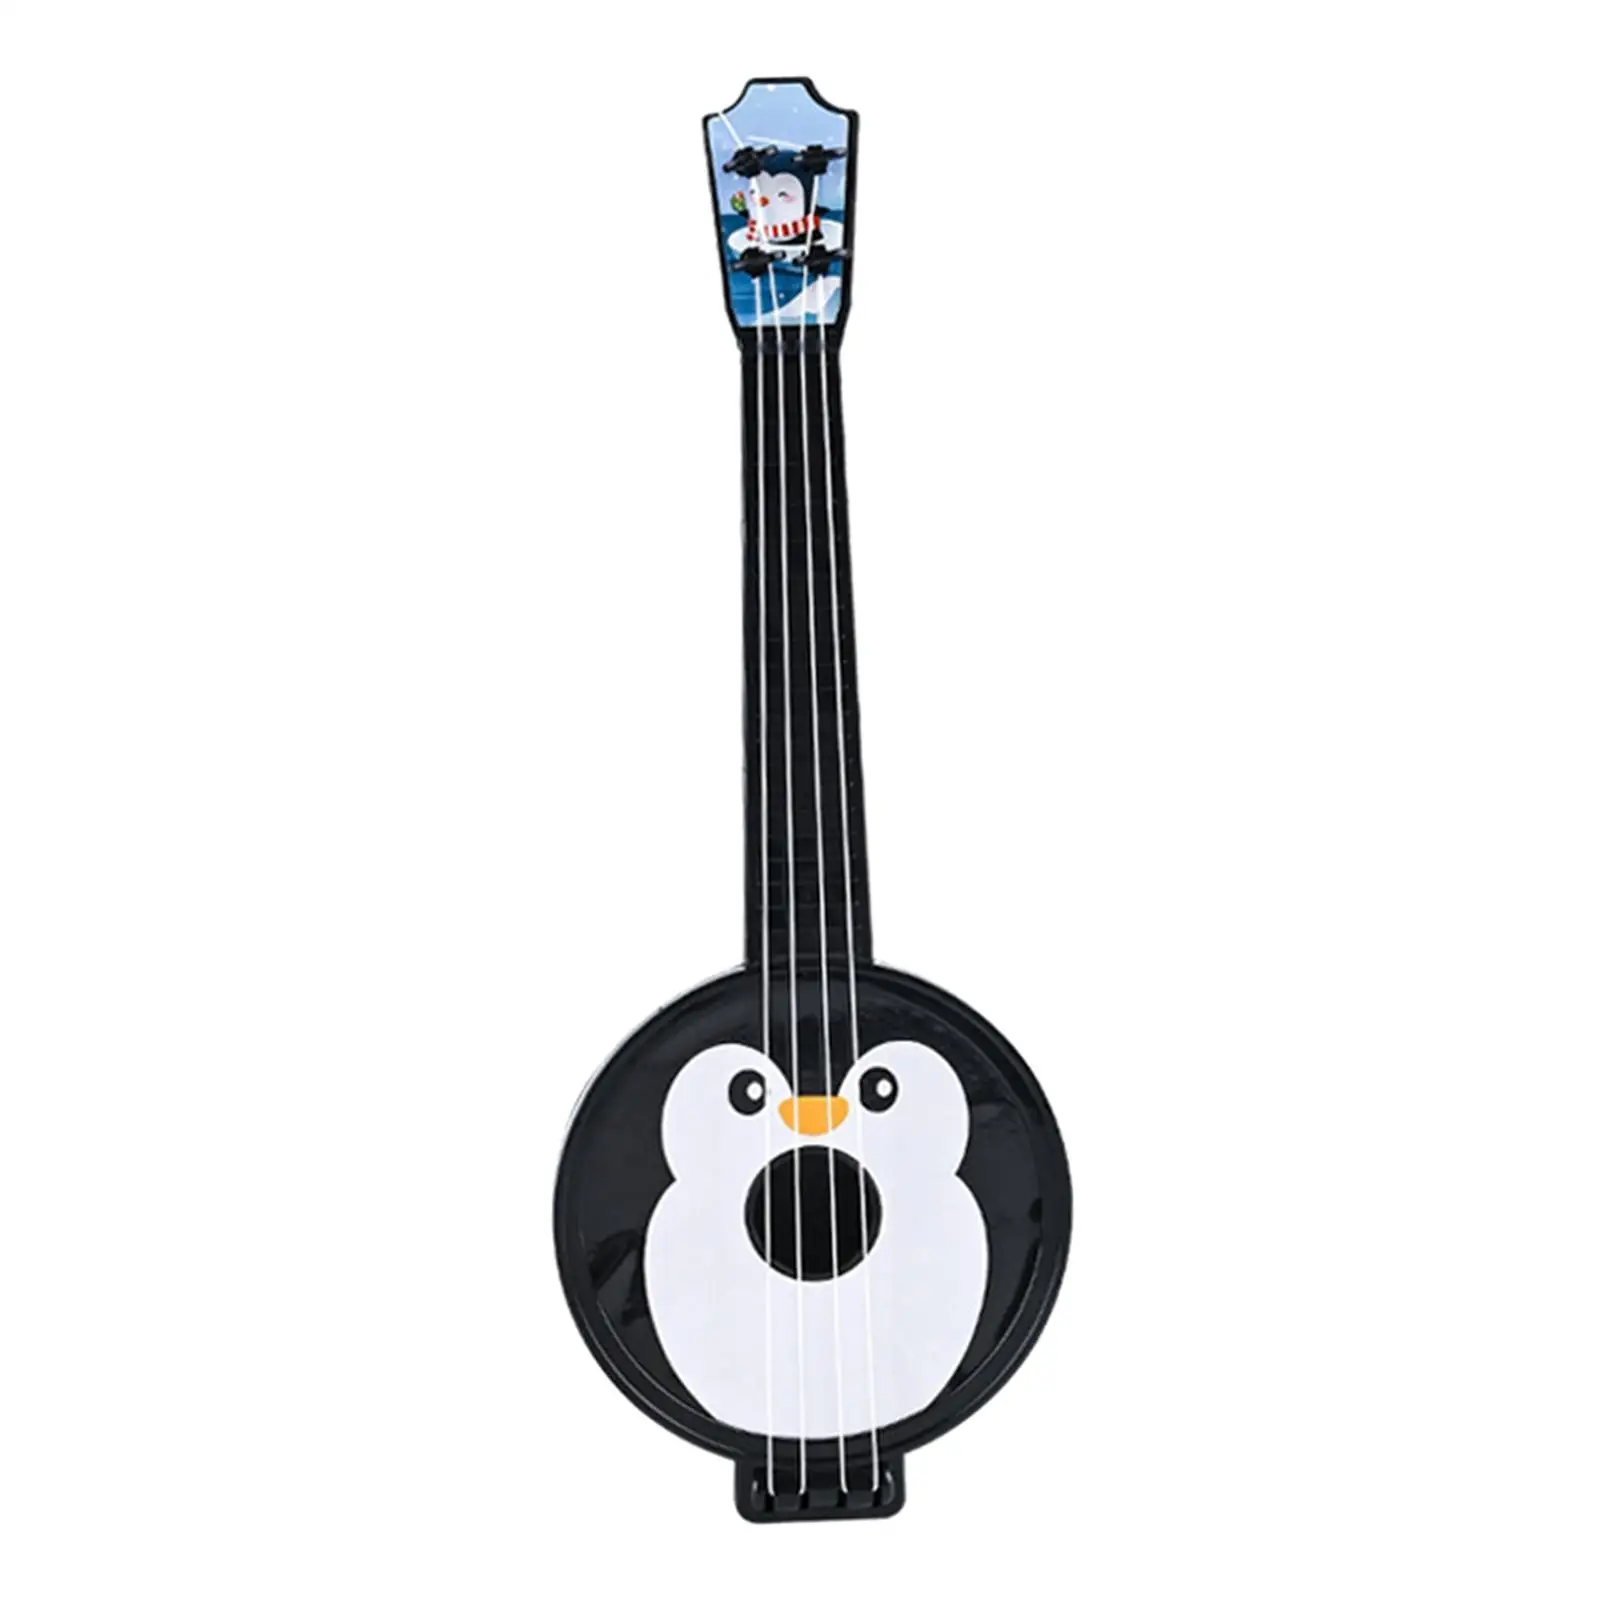  Ukulele Toy Early Educational 4 Strings Play Stringed Instruments Small Guitar for Boys Girls Toddler Baby Beginner Xmas Gifts